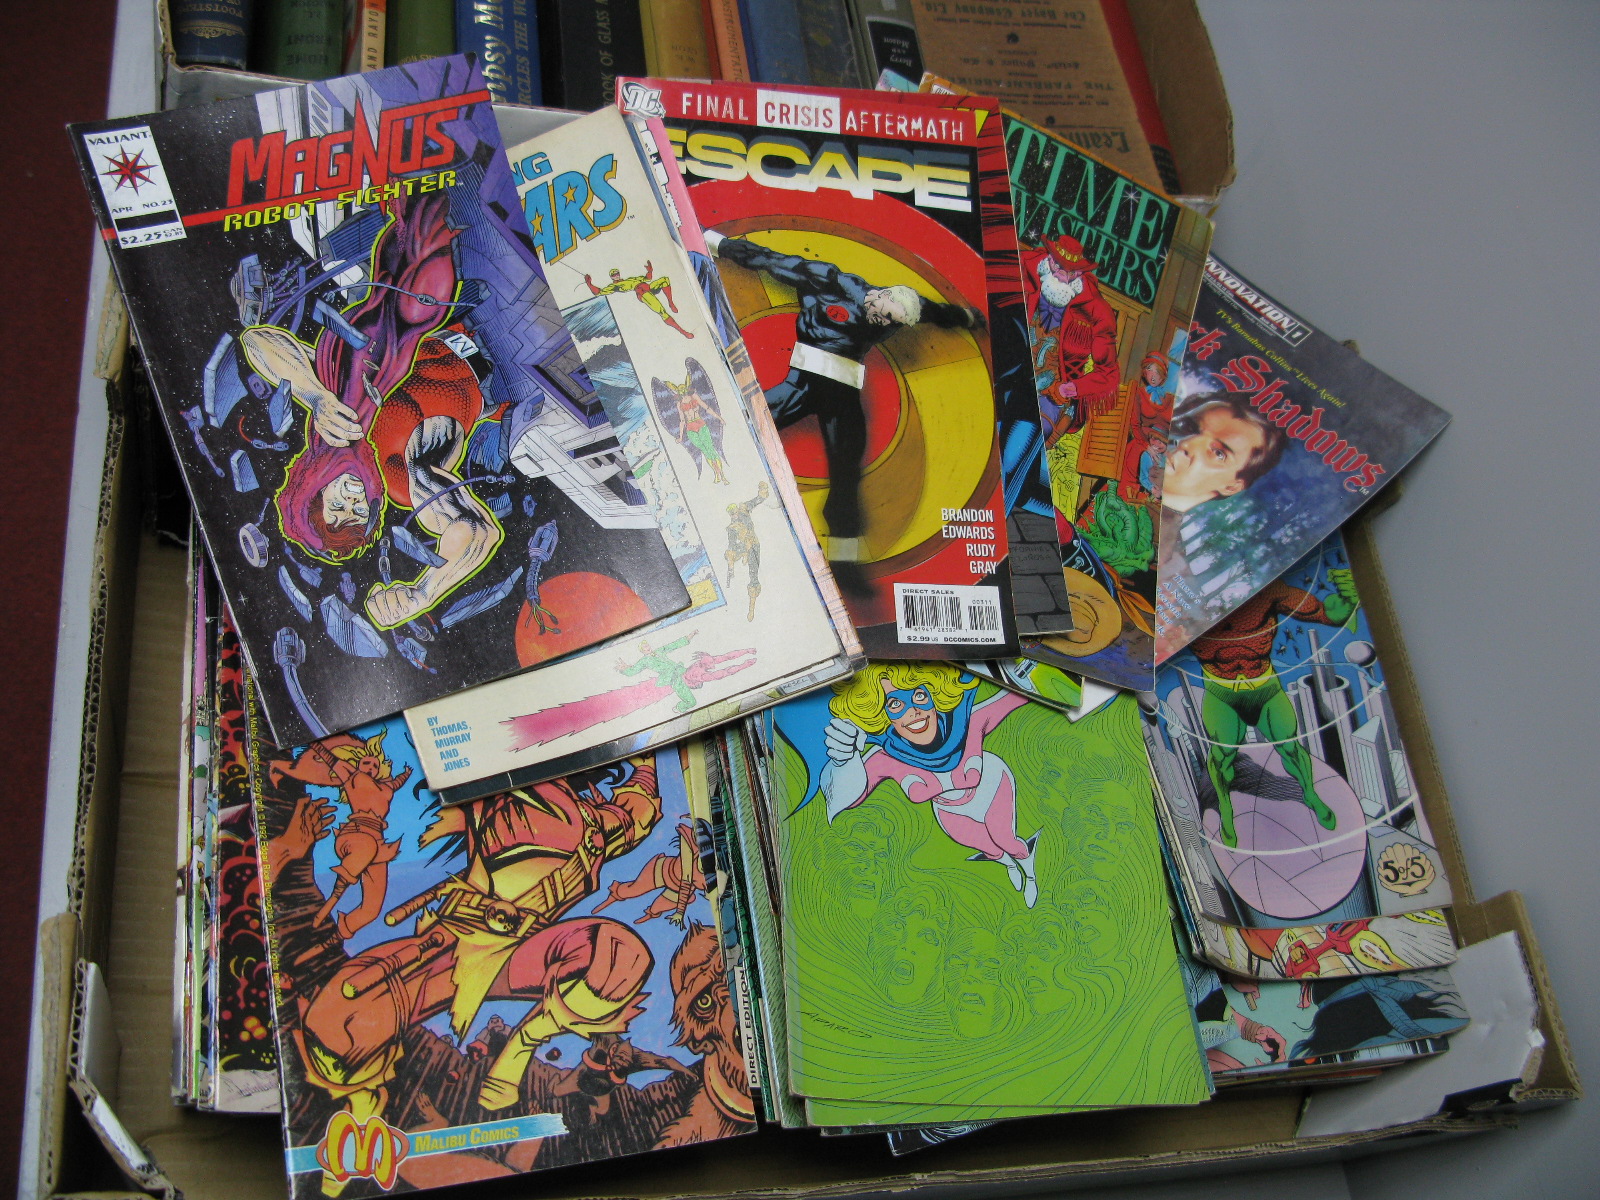 A Collection of Approximately Two Hundred Comics, by DC, Marvel, First, Valiant, QC and other